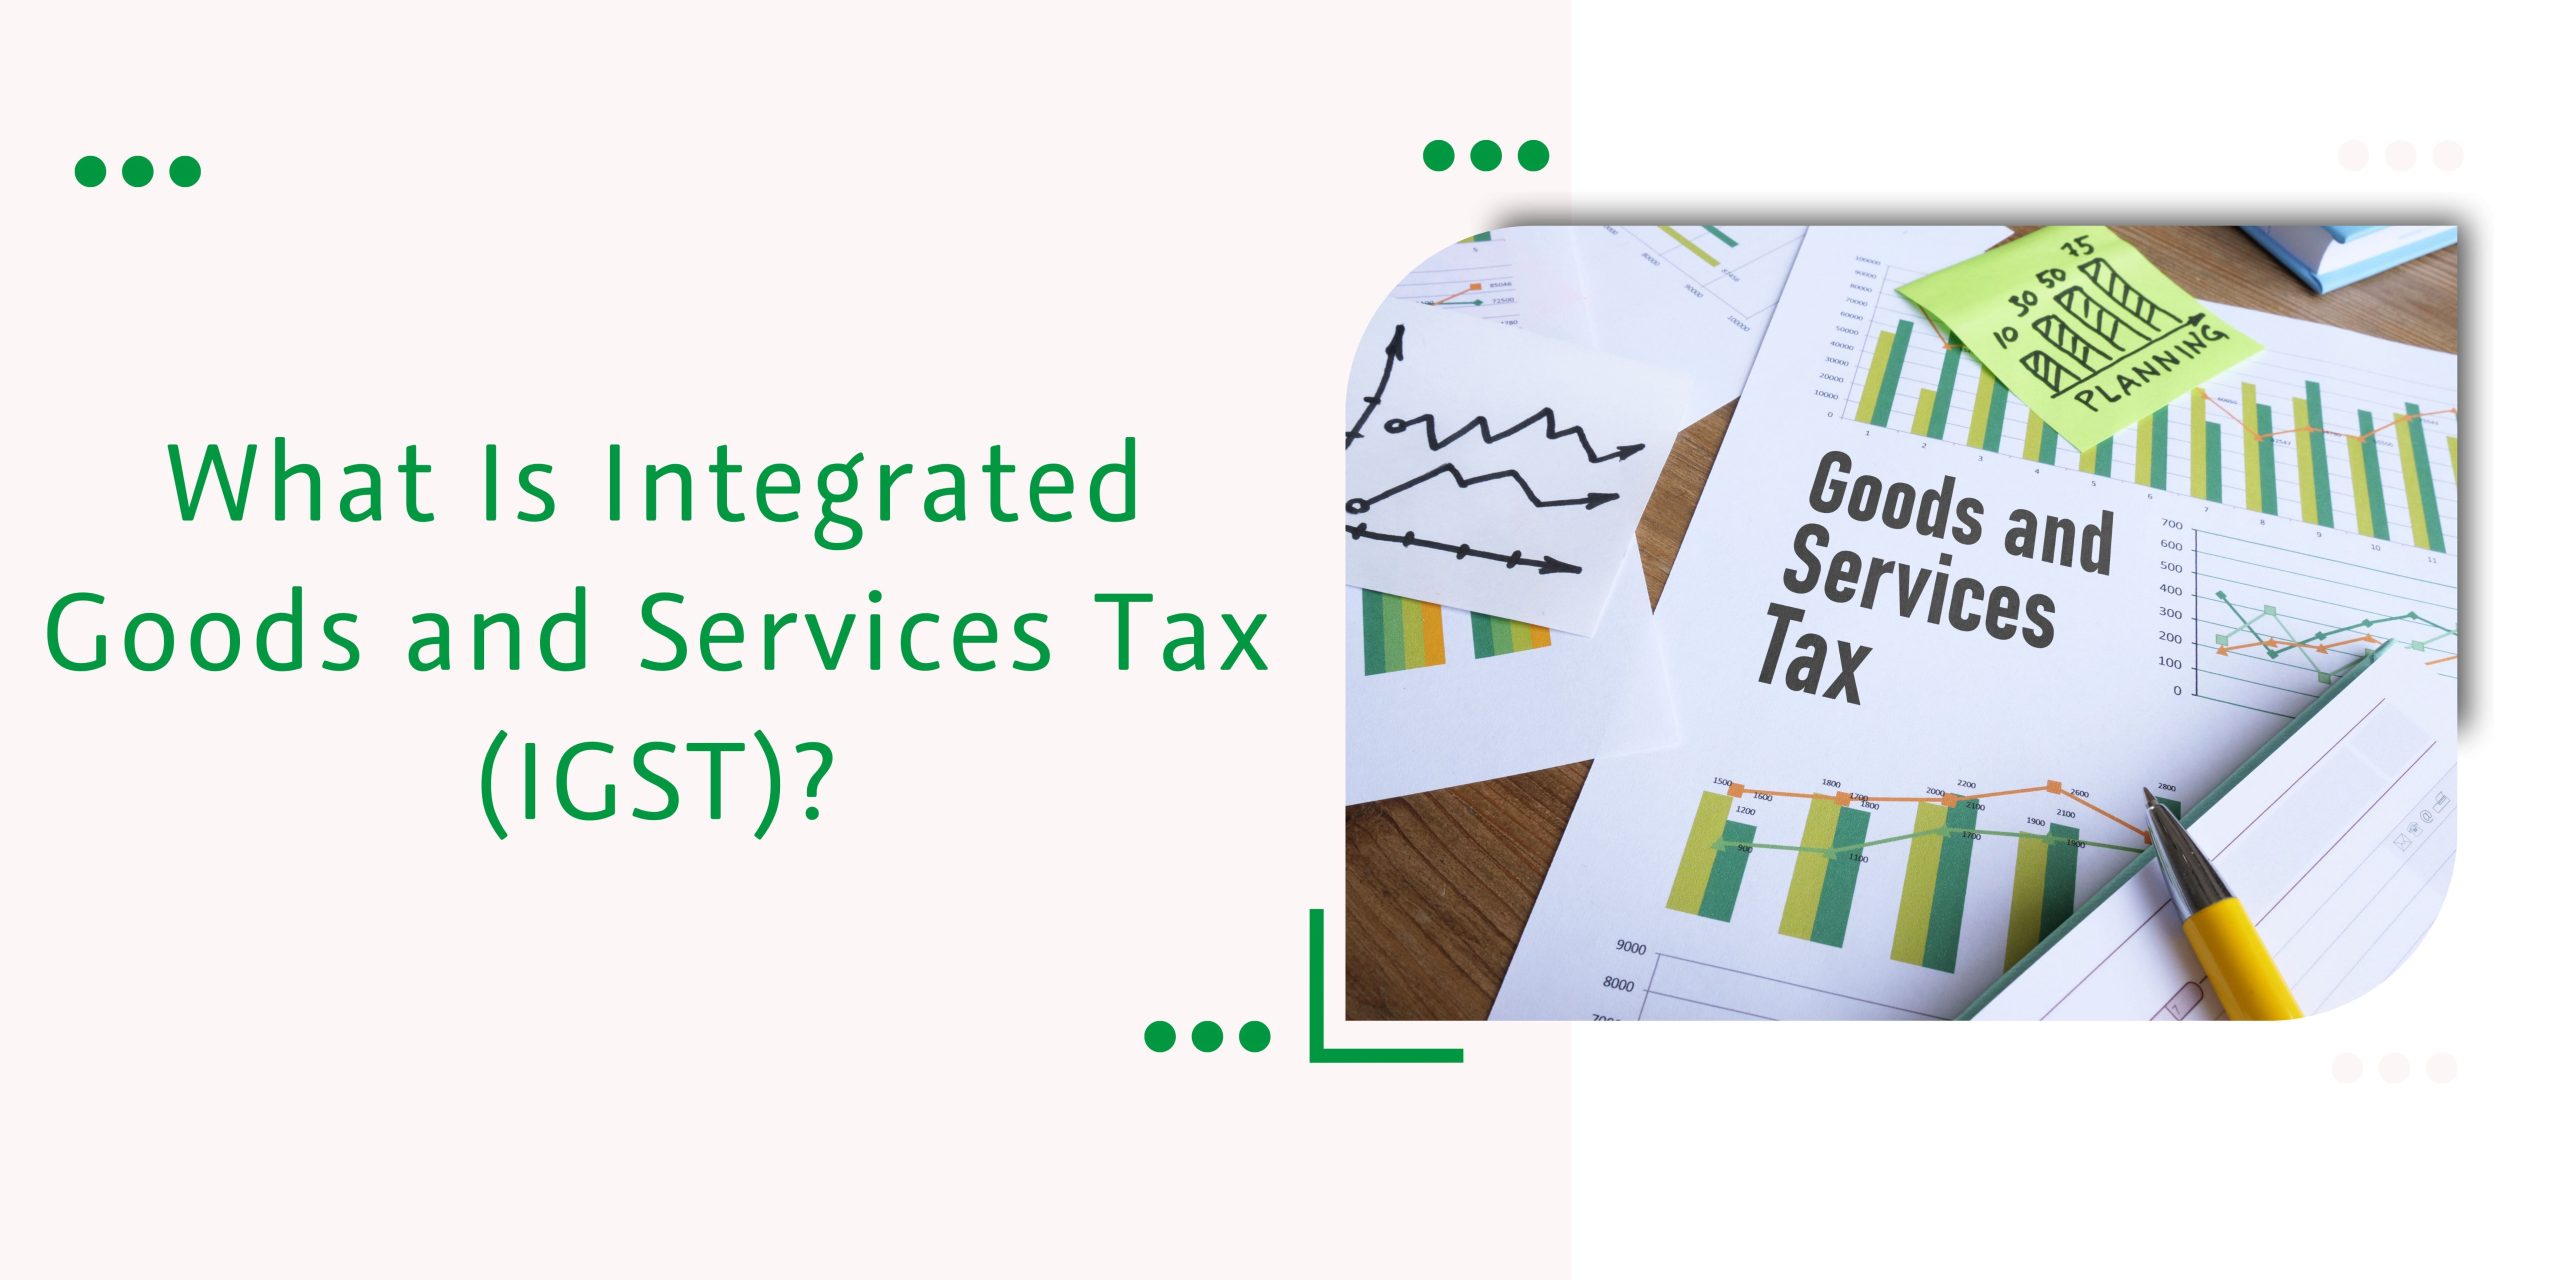 What Is Integrated Goods and Services Tax (IGST)?